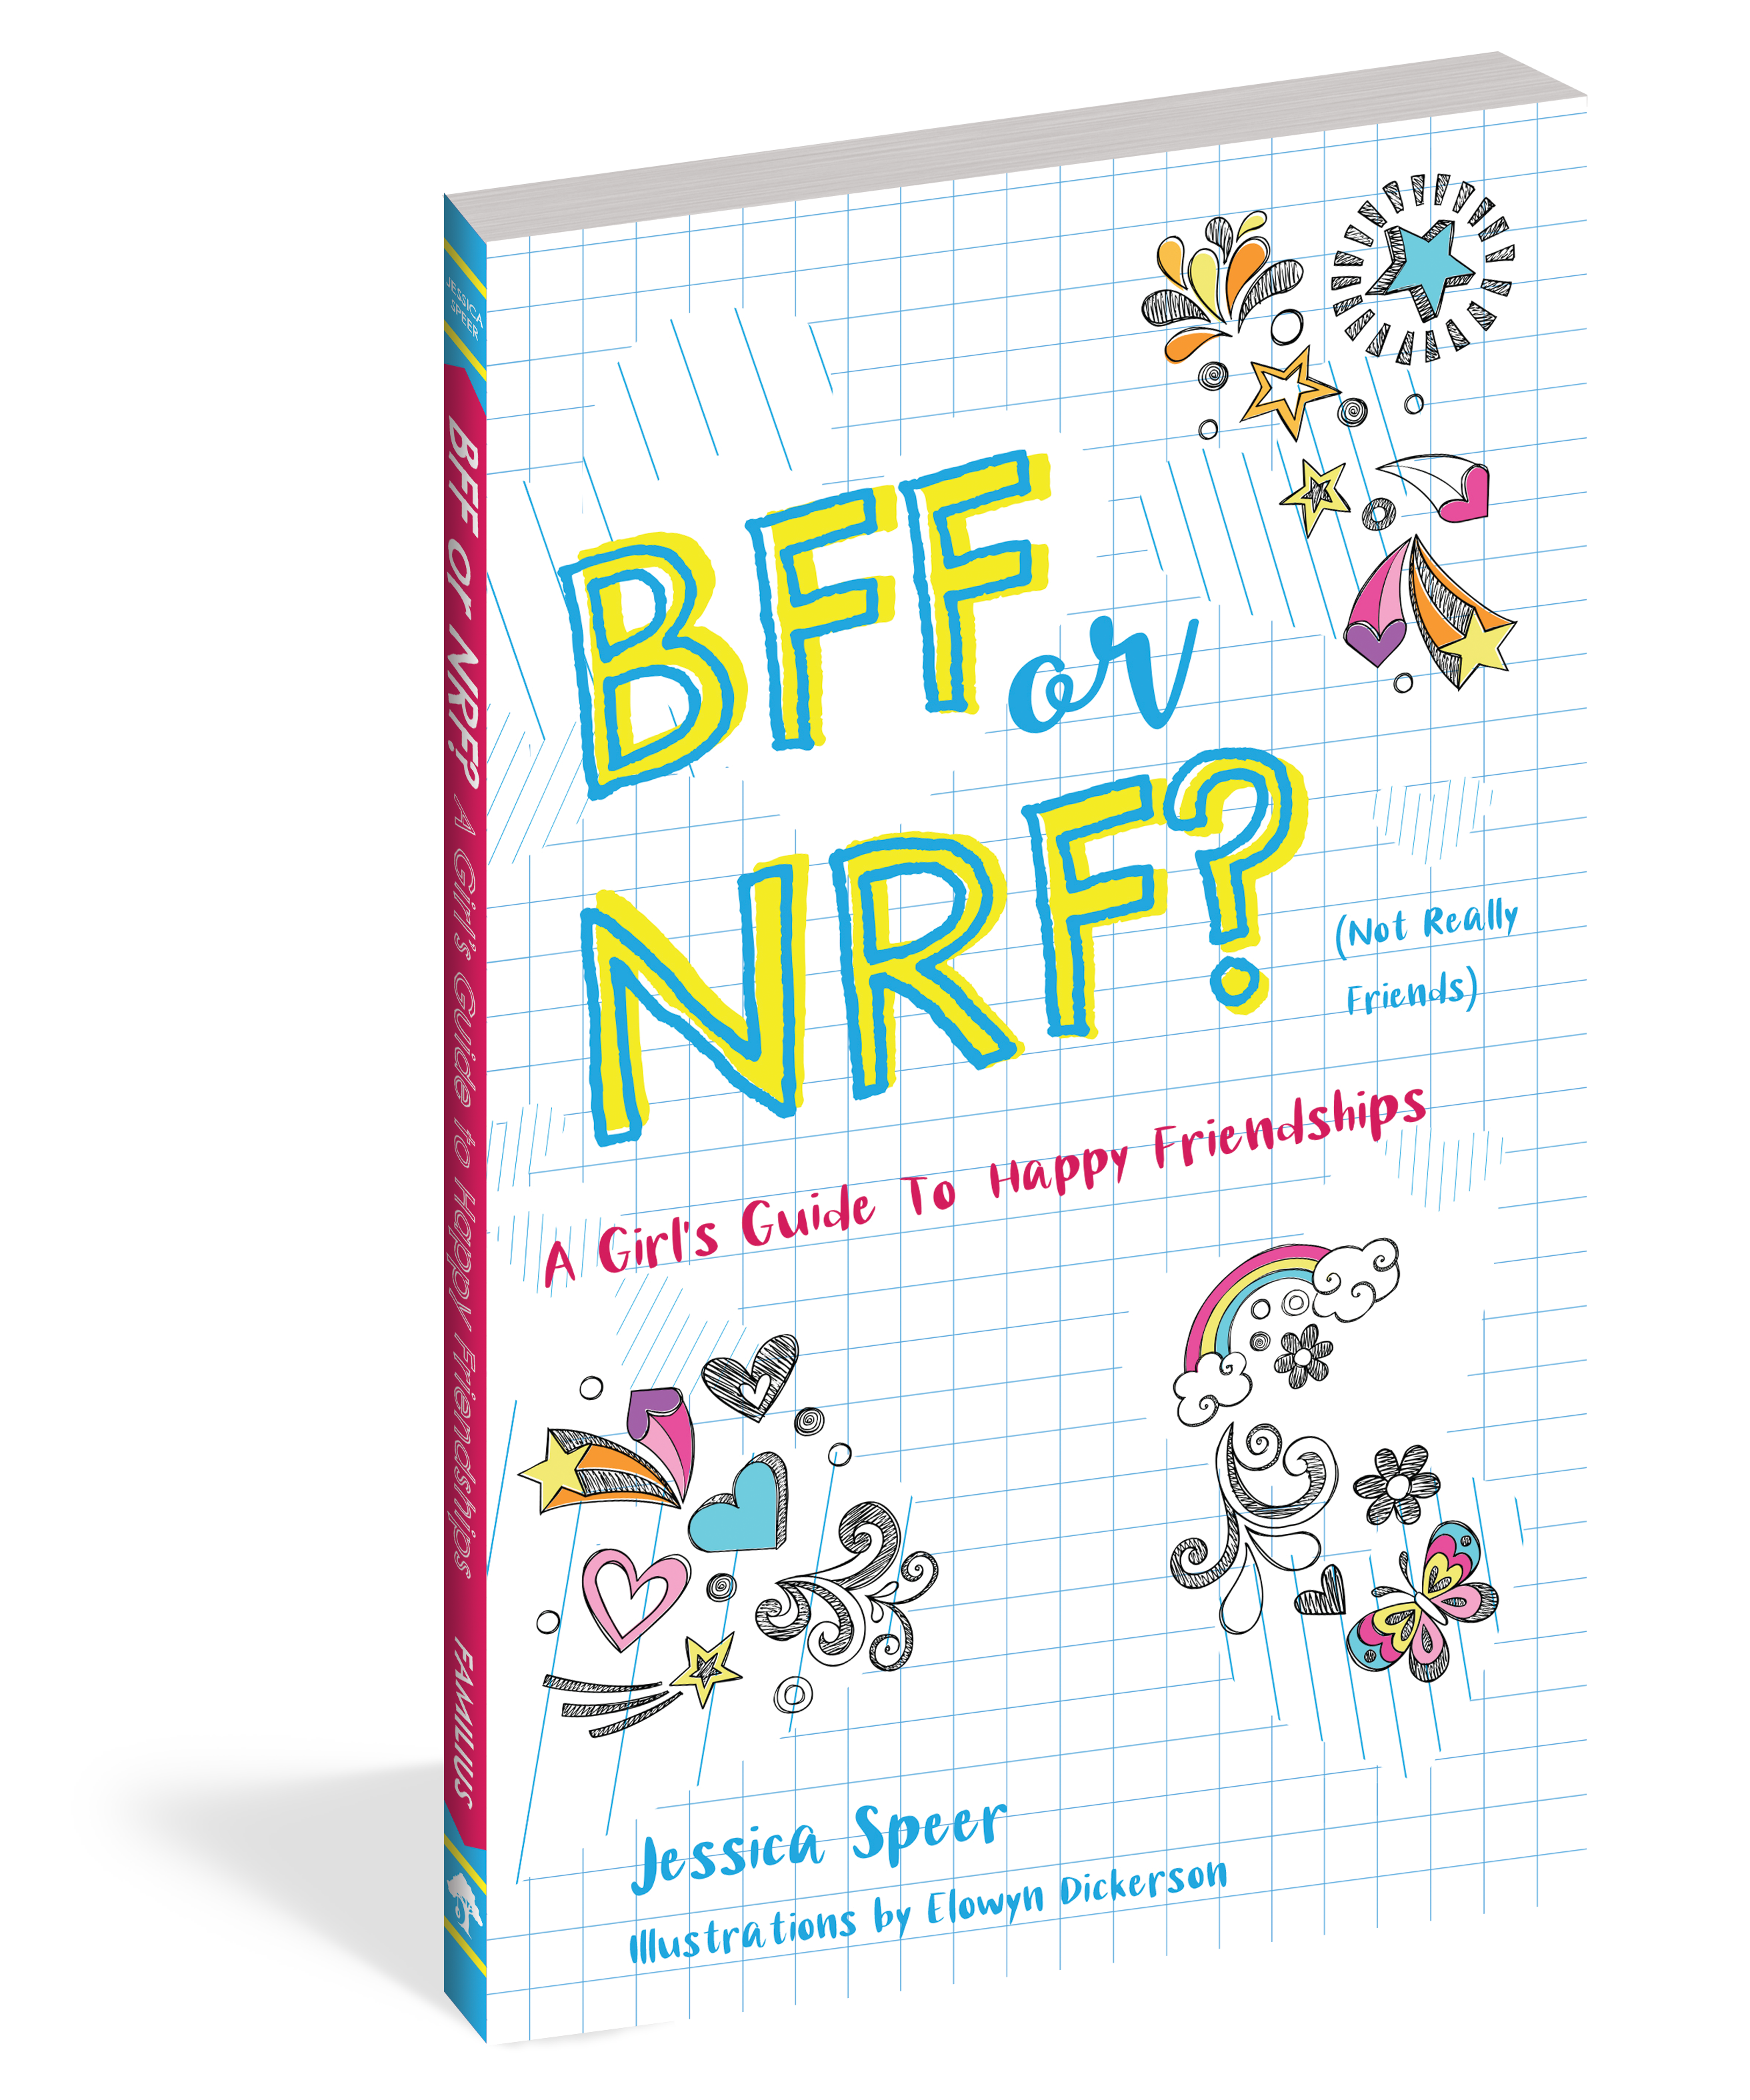 BFF or NRF? A Girl's Guide To Happy Friendships    